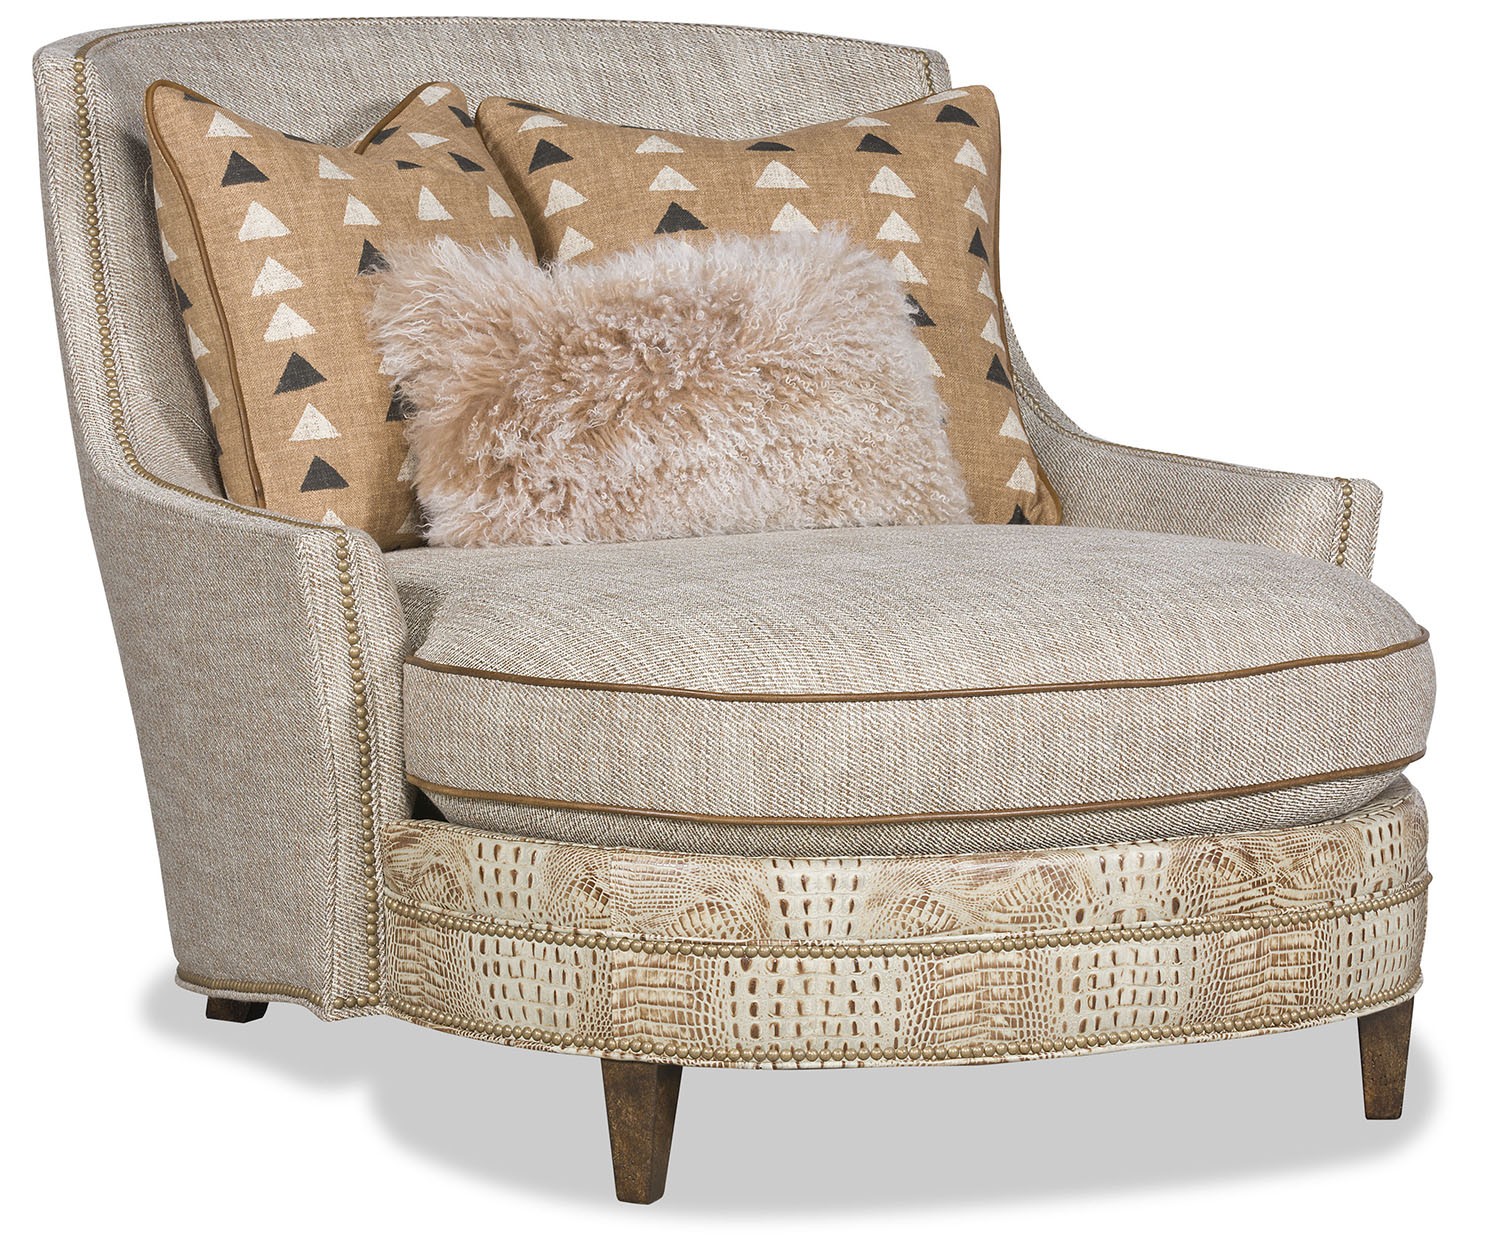 SETTEES, CHAISE, BENCHES Breathtaking Sophisticated modern chaise